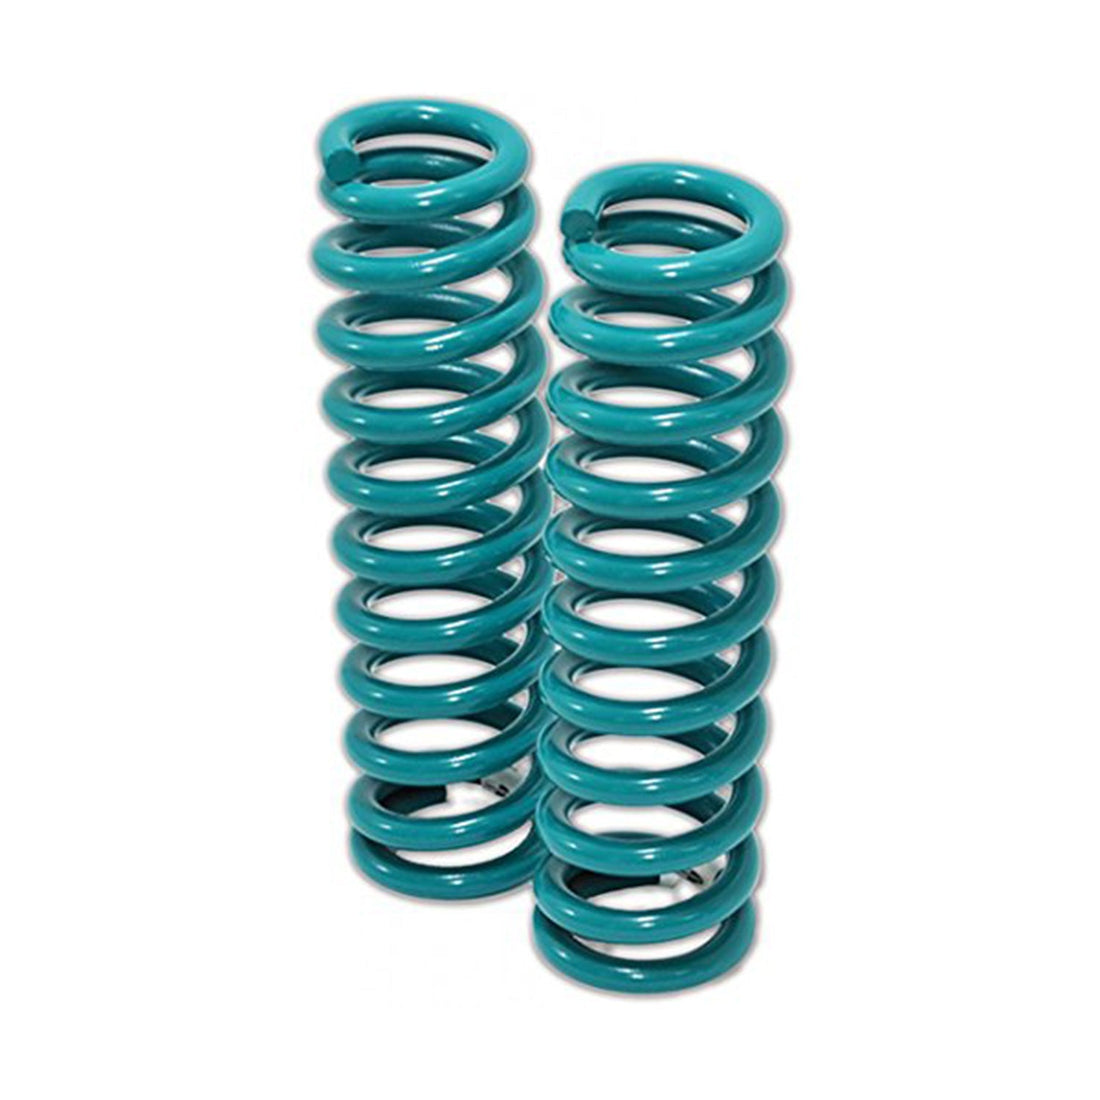 Dobinsons Pair of Front Coil Springs (C45-442)